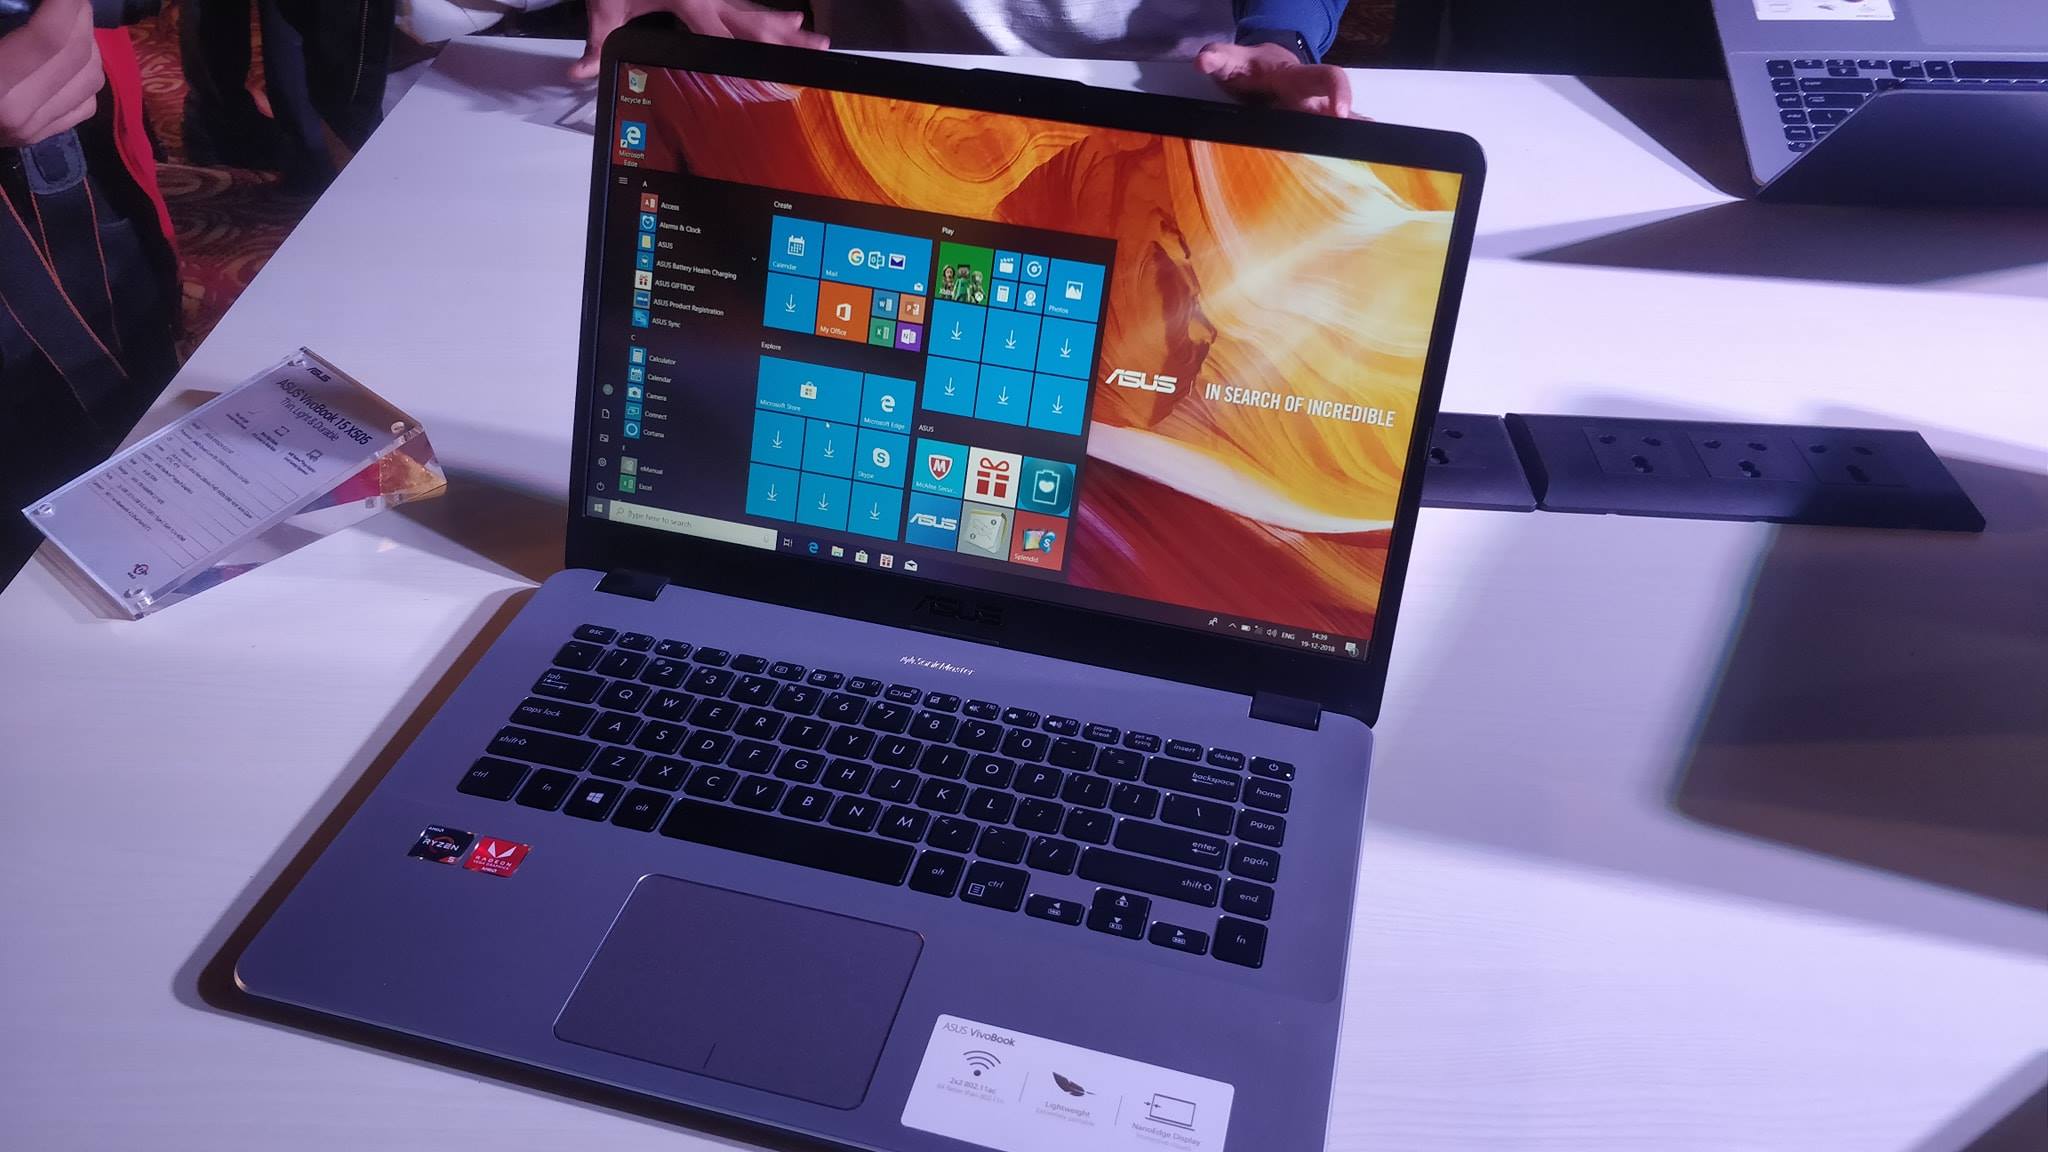 ASUS Vivobook 15 And F570 Gaming Laptop With AMD Ryzen